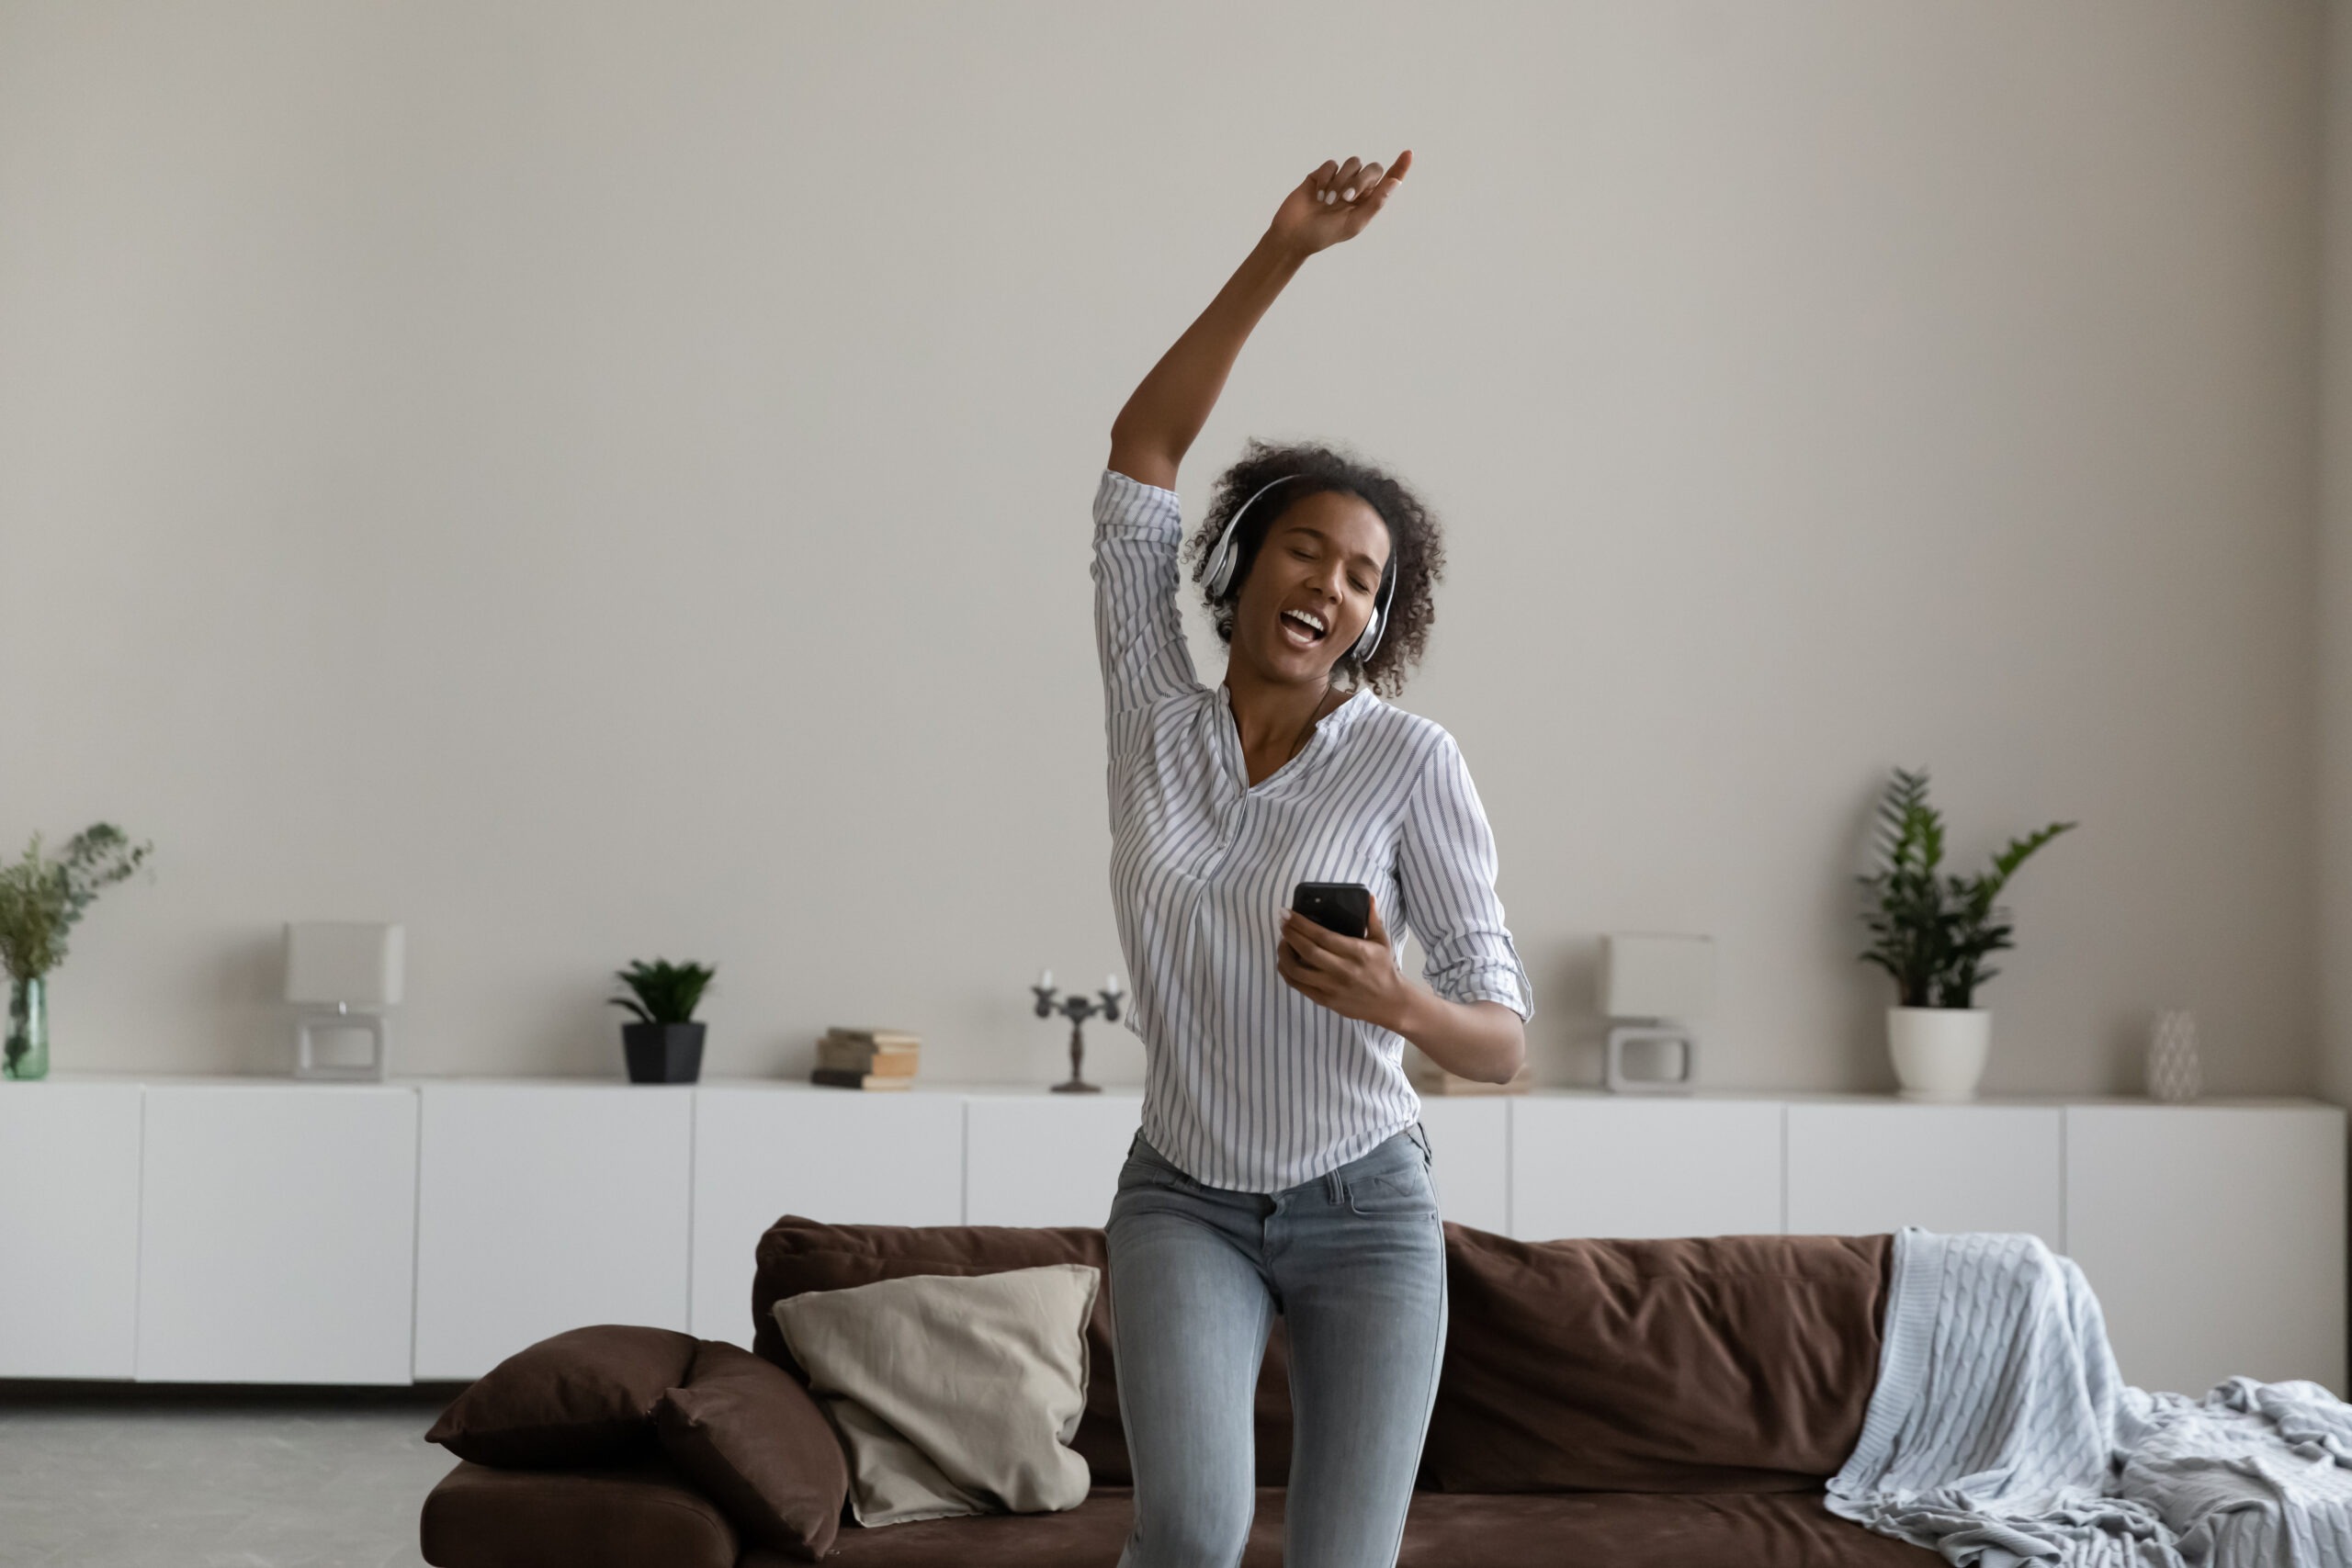 A woman is dancing with her headphones on, enjoying being alone. A brown couch is shown behind her.